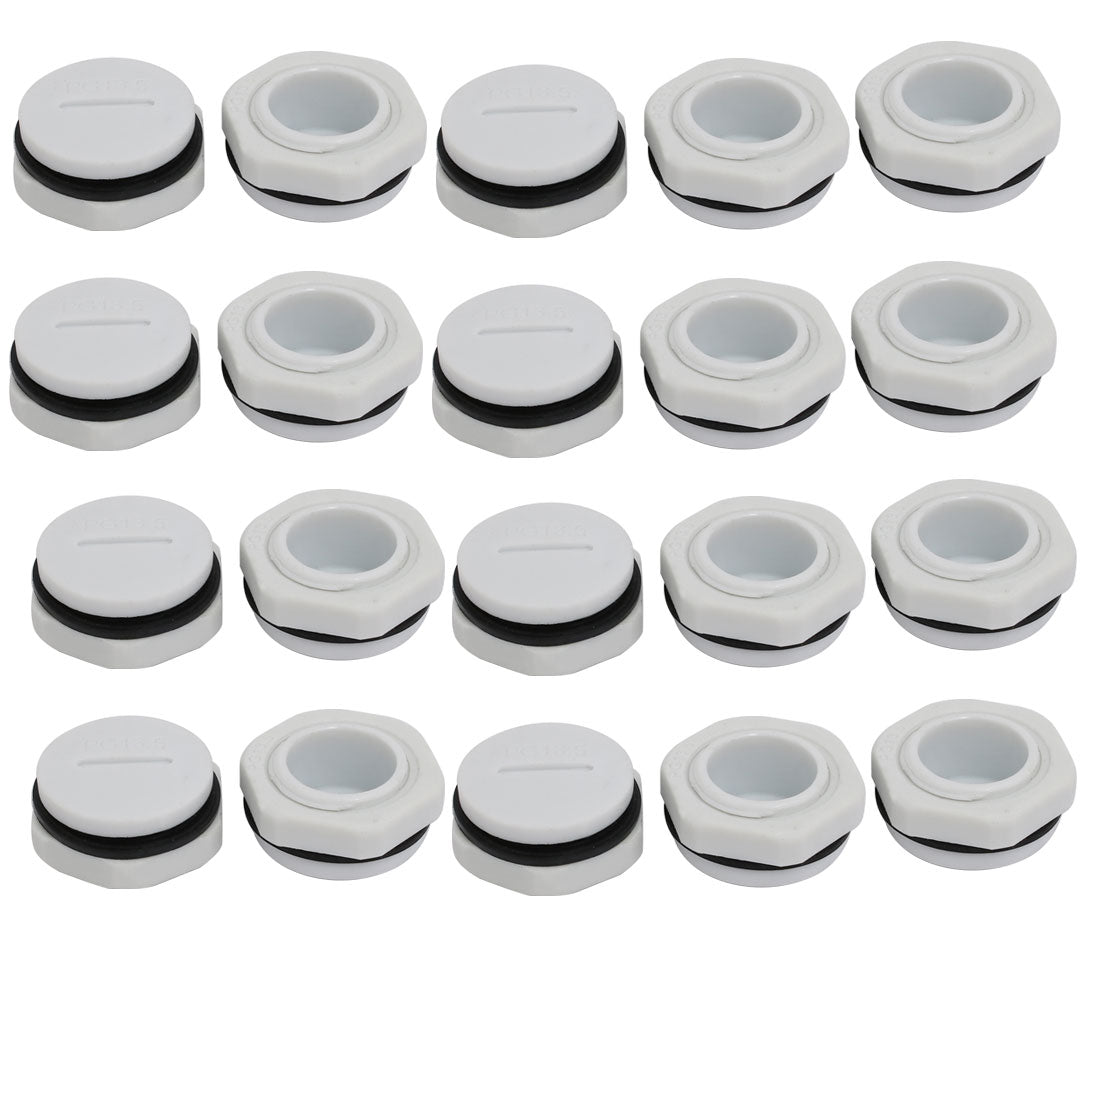 uxcell Uxcell PG13.5 Nylon Male Threaded Cable Gland Screw End Cap Cover Gray 10pcs